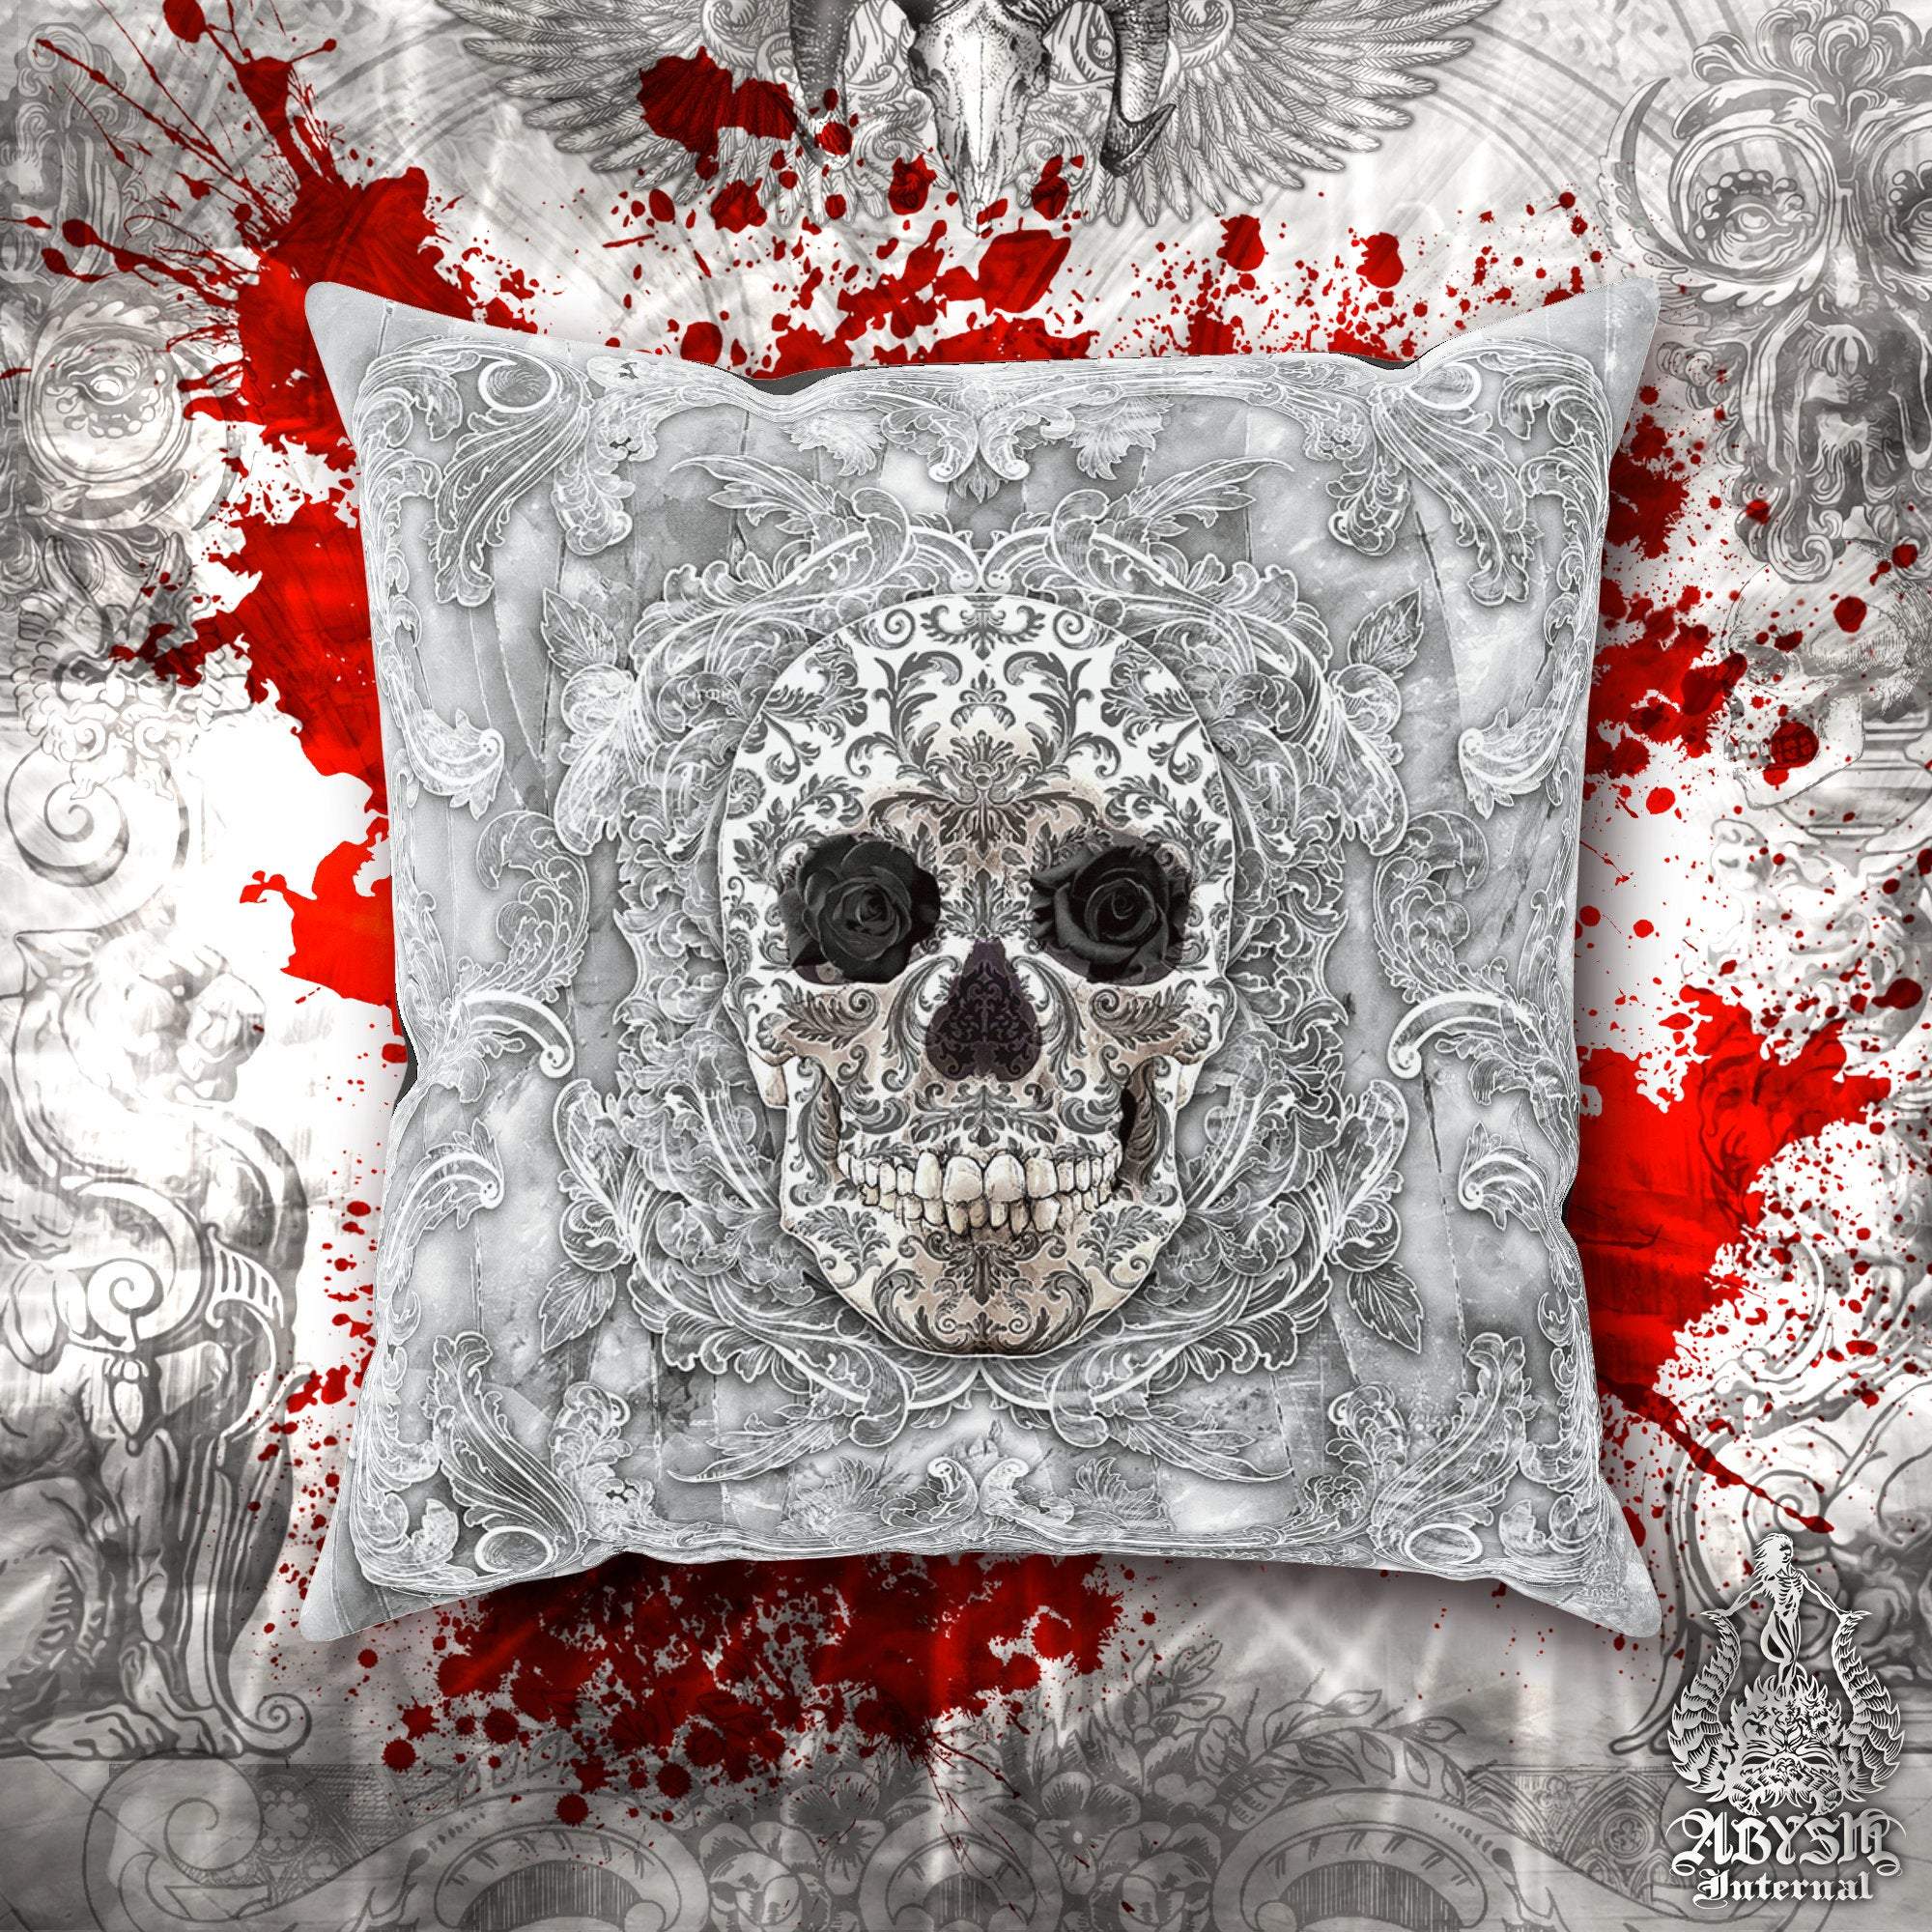 https://cdn.shopify.com/s/files/1/0584/5608/0574/products/skull-throw-pillow-decorative-accent-cushion-horror-and-white-goth-room-decor-macabre-art-alternative-home-stone-abysm-internal-350546.jpg?v=1686695970&width=4000